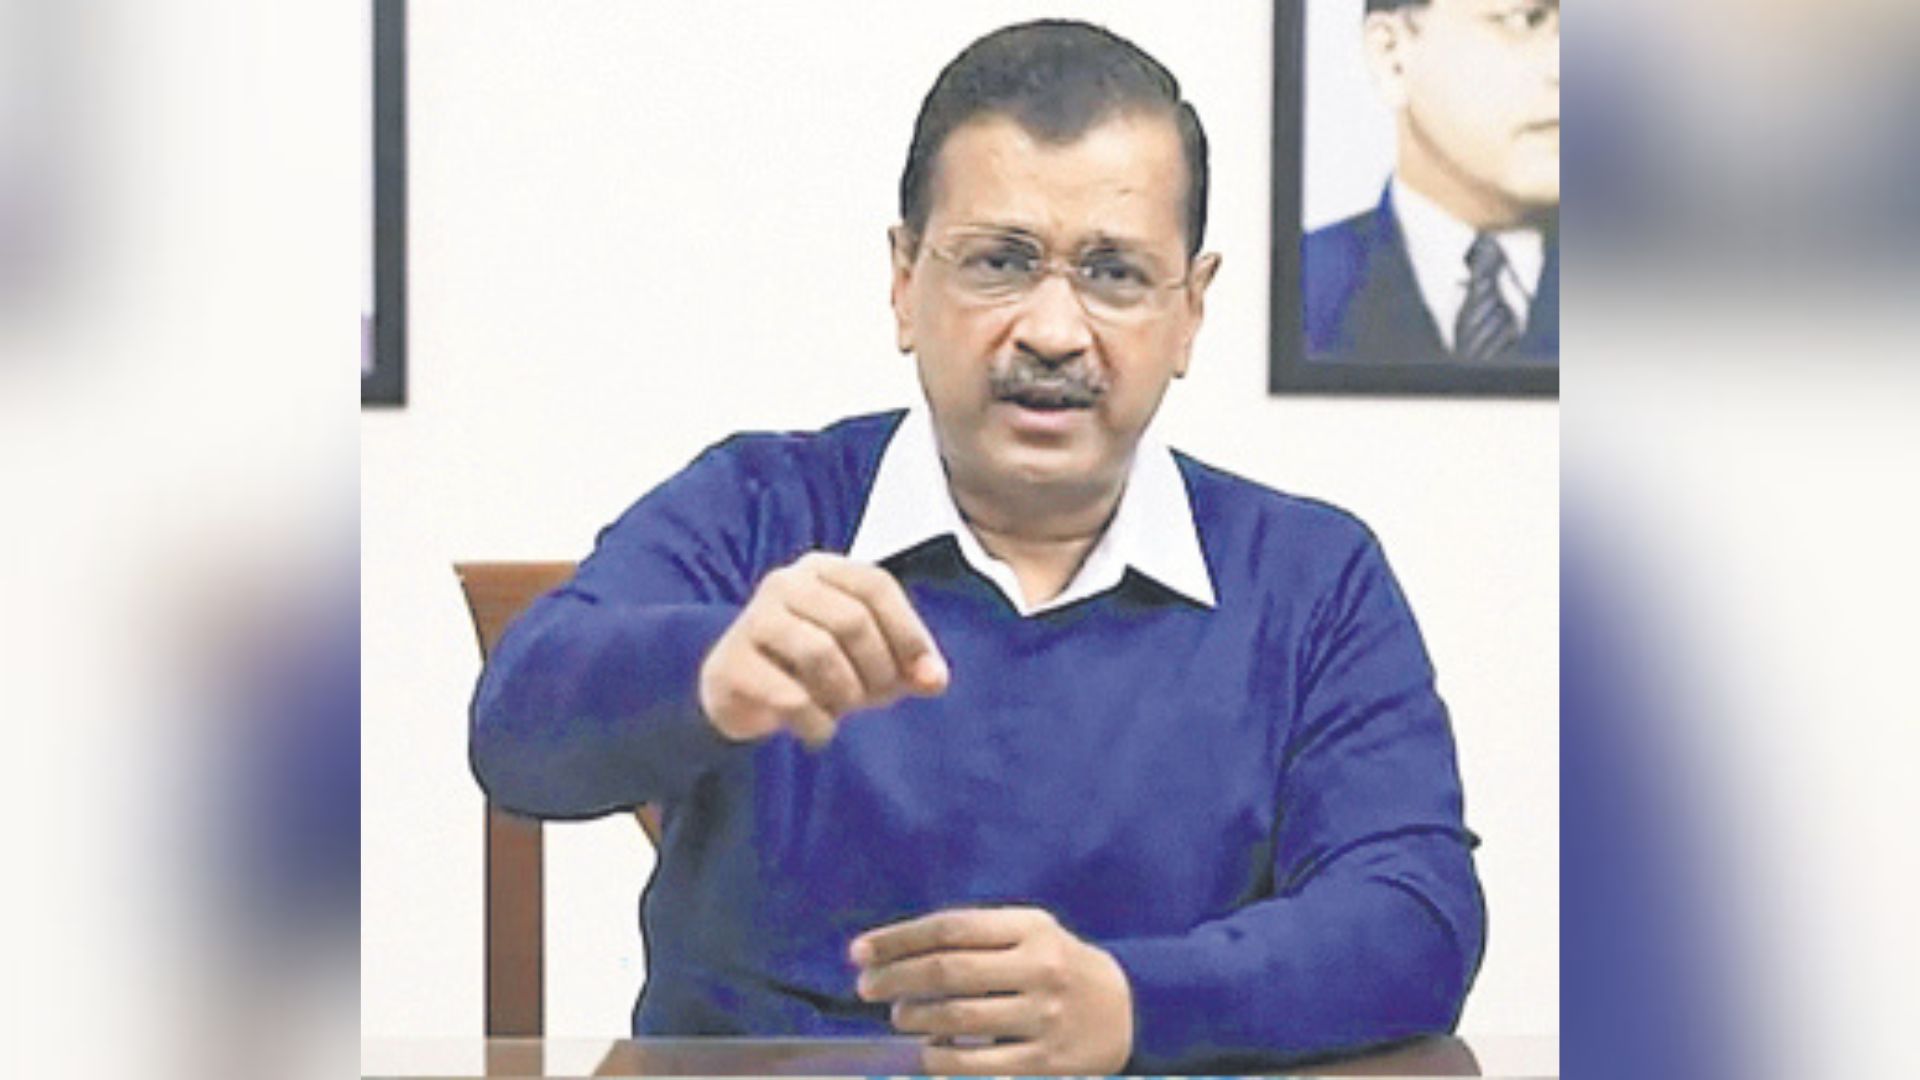 Delhi HC dismisses third plea for Kejriwal’s removal from CM post, imposes fine instead